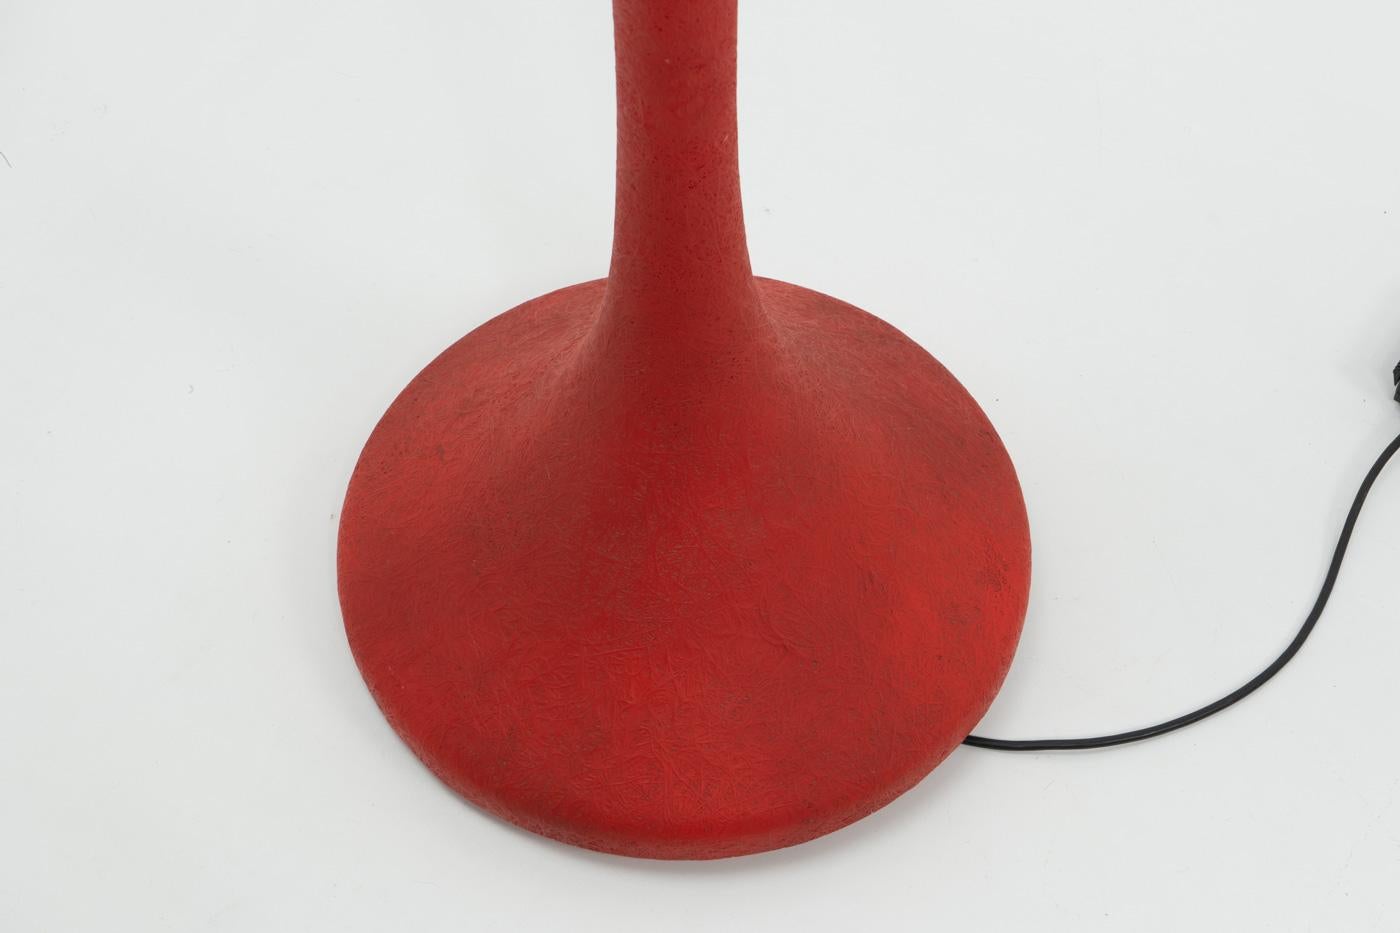 Organically Shaped E.T.A. Floor Lamp by Guglielmo Berchicci for Kundalini, 2000s For Sale 5